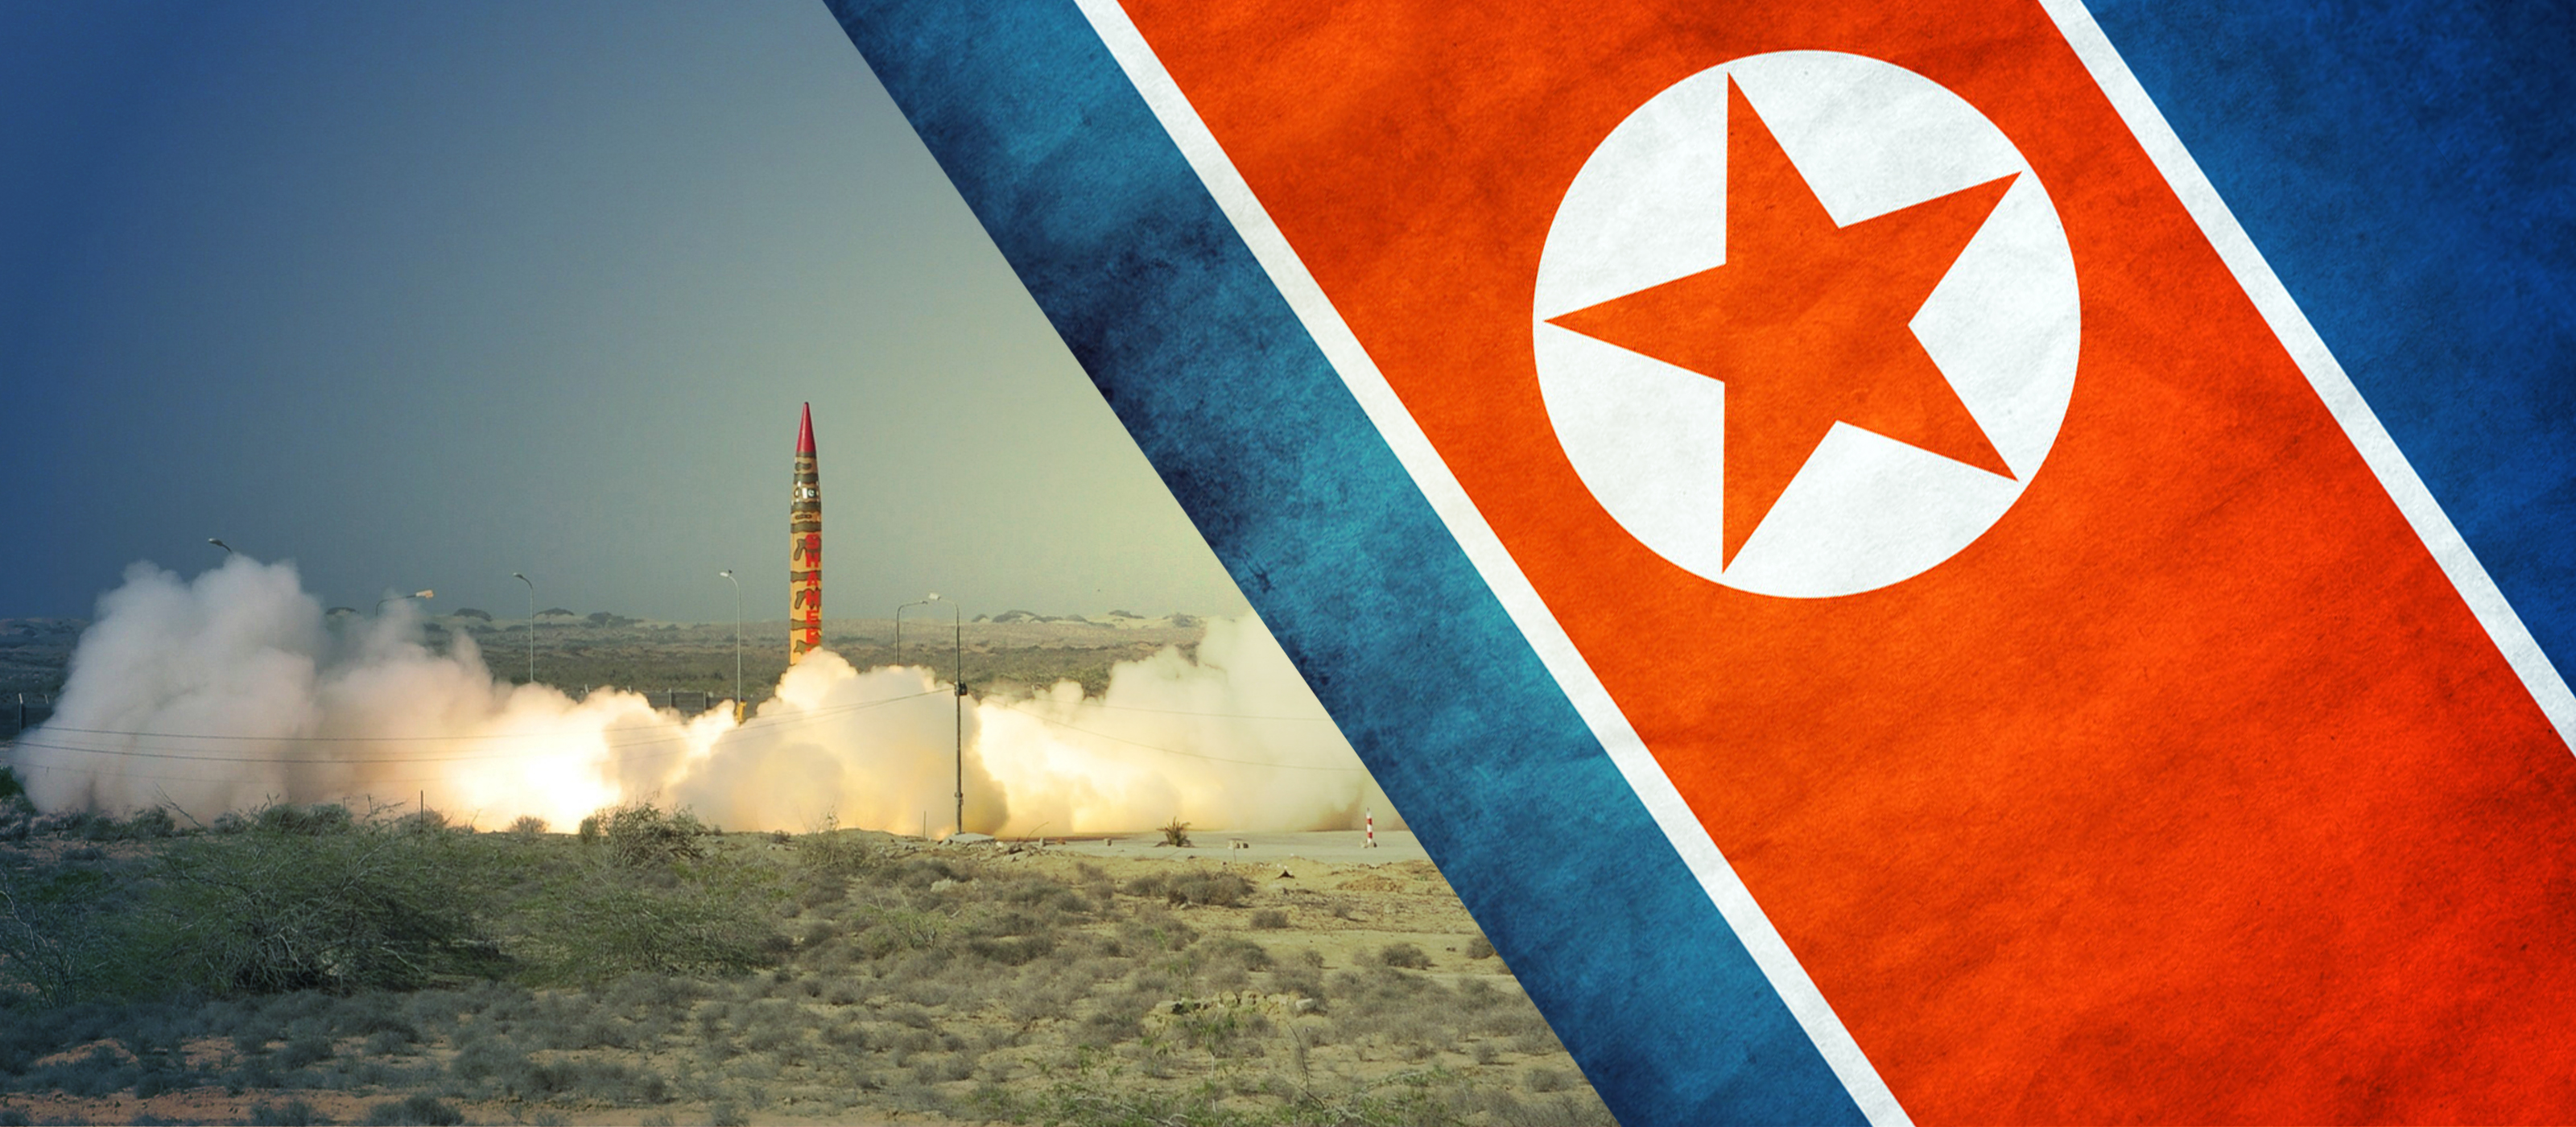 Timeline: DPRK’s nuclear development and talks